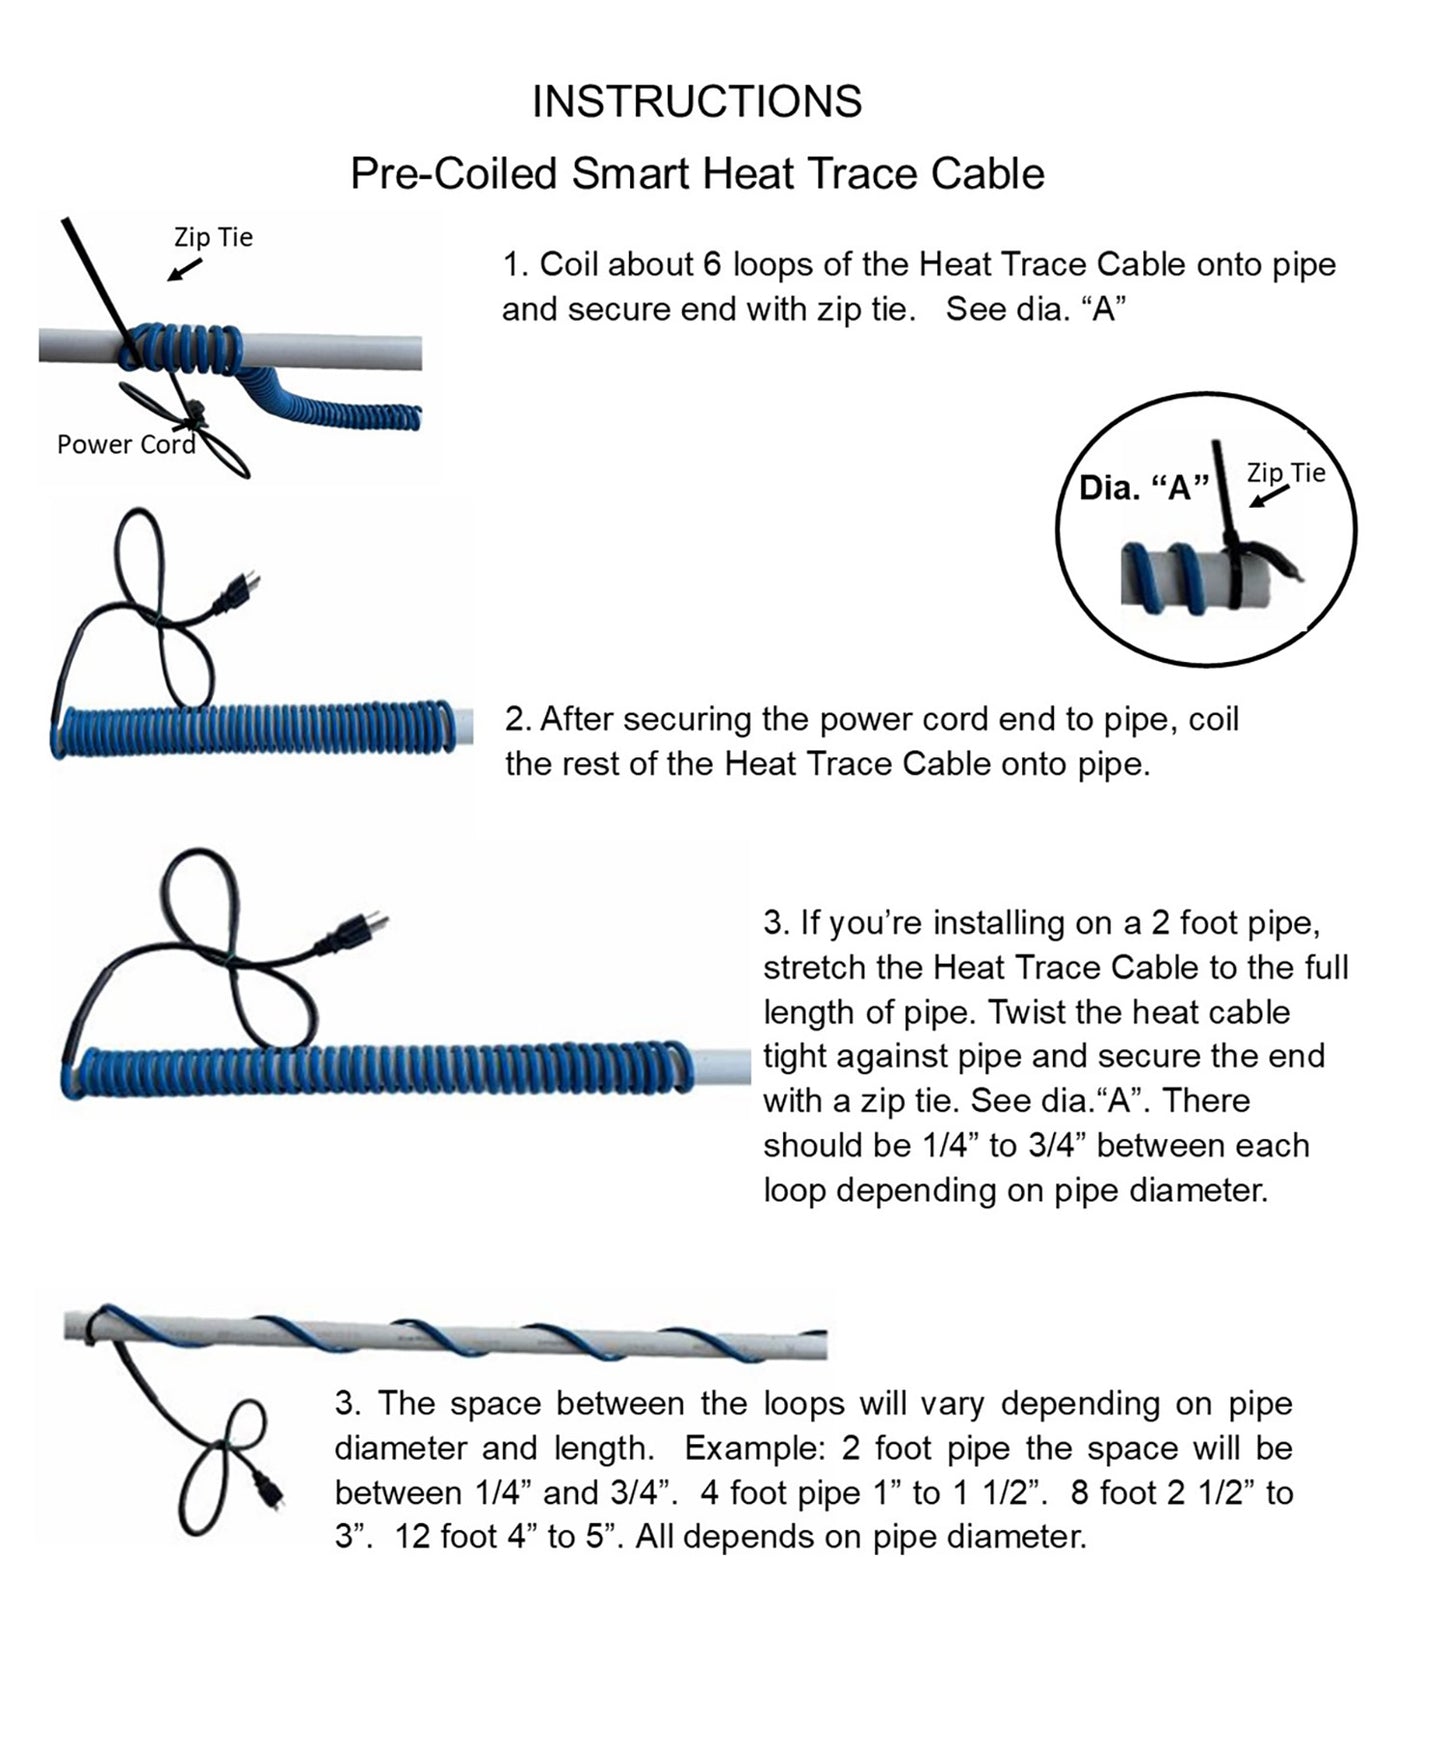 Pre-Coiled Smart Heat Trace Cable